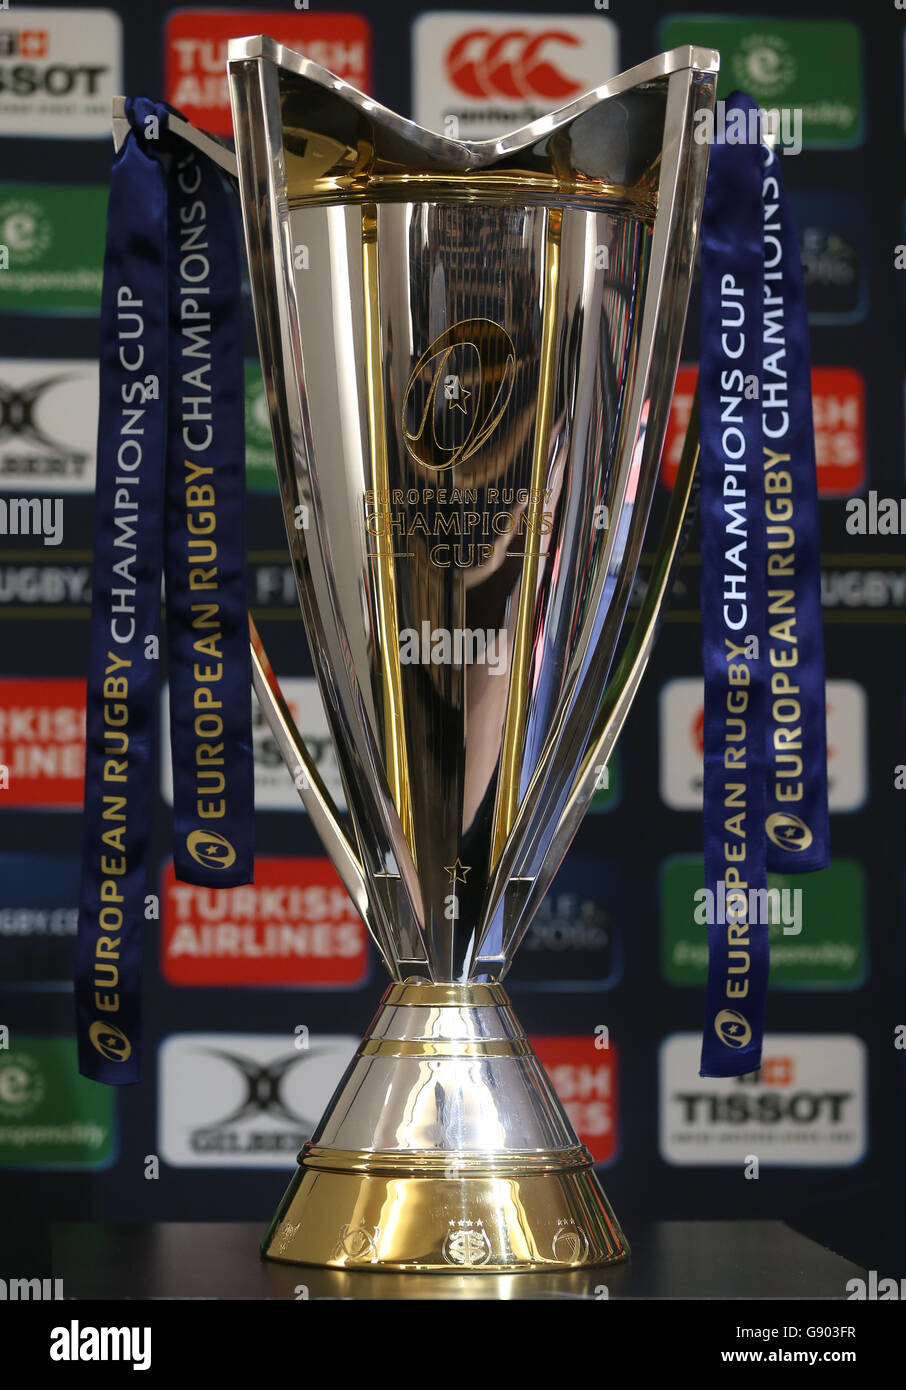 European Champions Cup Rugby Trophy High Resolution Stock Photography And Images Alamy